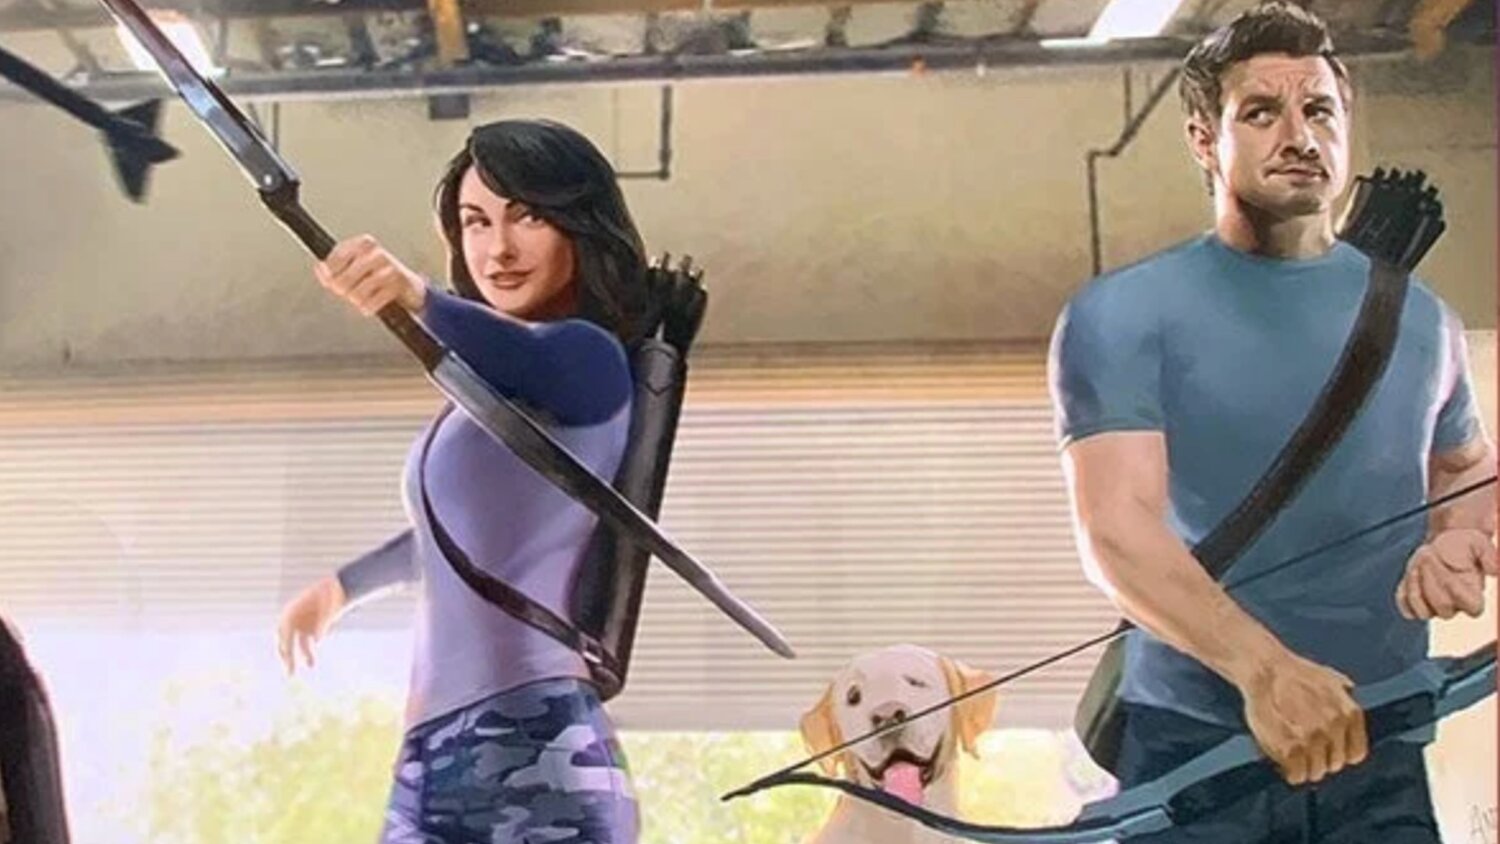 HAWKEYE Set Photo Feature Jeremy Renner and Hailee Steinfeld as Clint Barton and Kate Bishop